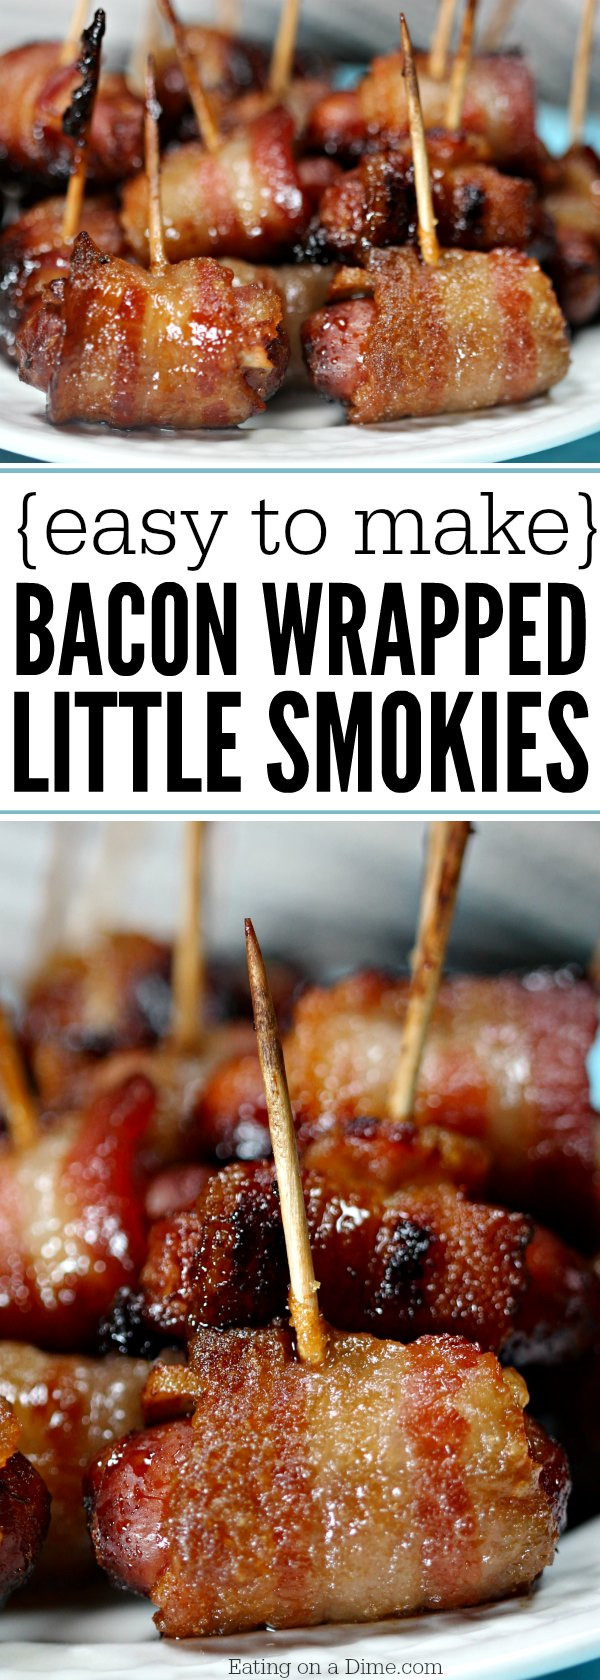 Easy Bacon Recipes Appetizers
 Bacon wrapped little smokies recipe Easy appetizer recipe